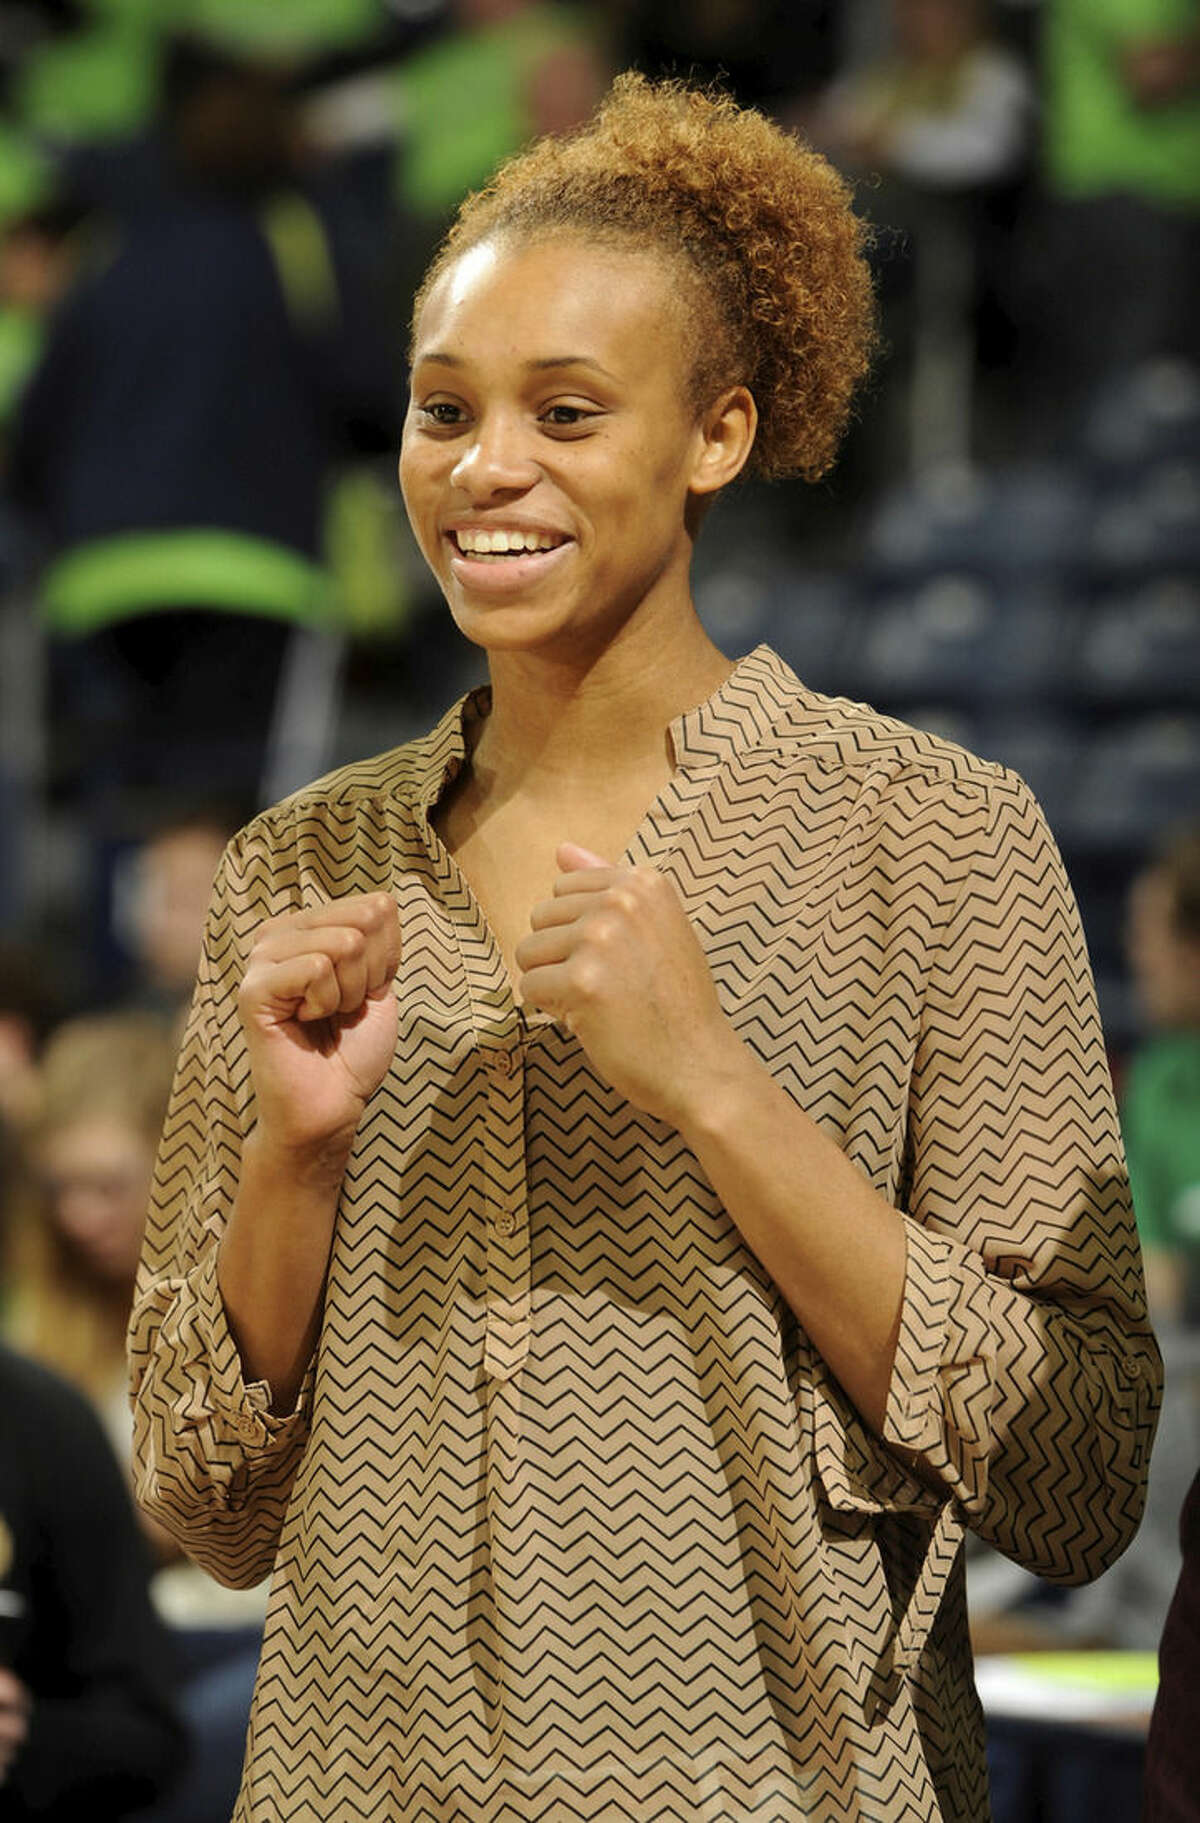 Notre Dame forward Brianna Turner stands in street clothes before an NCAA college basketball game against Connecticut, Saturday Dec. 6, 2014, in South Bend, Ind. (AP Photo/Joe Raymond)